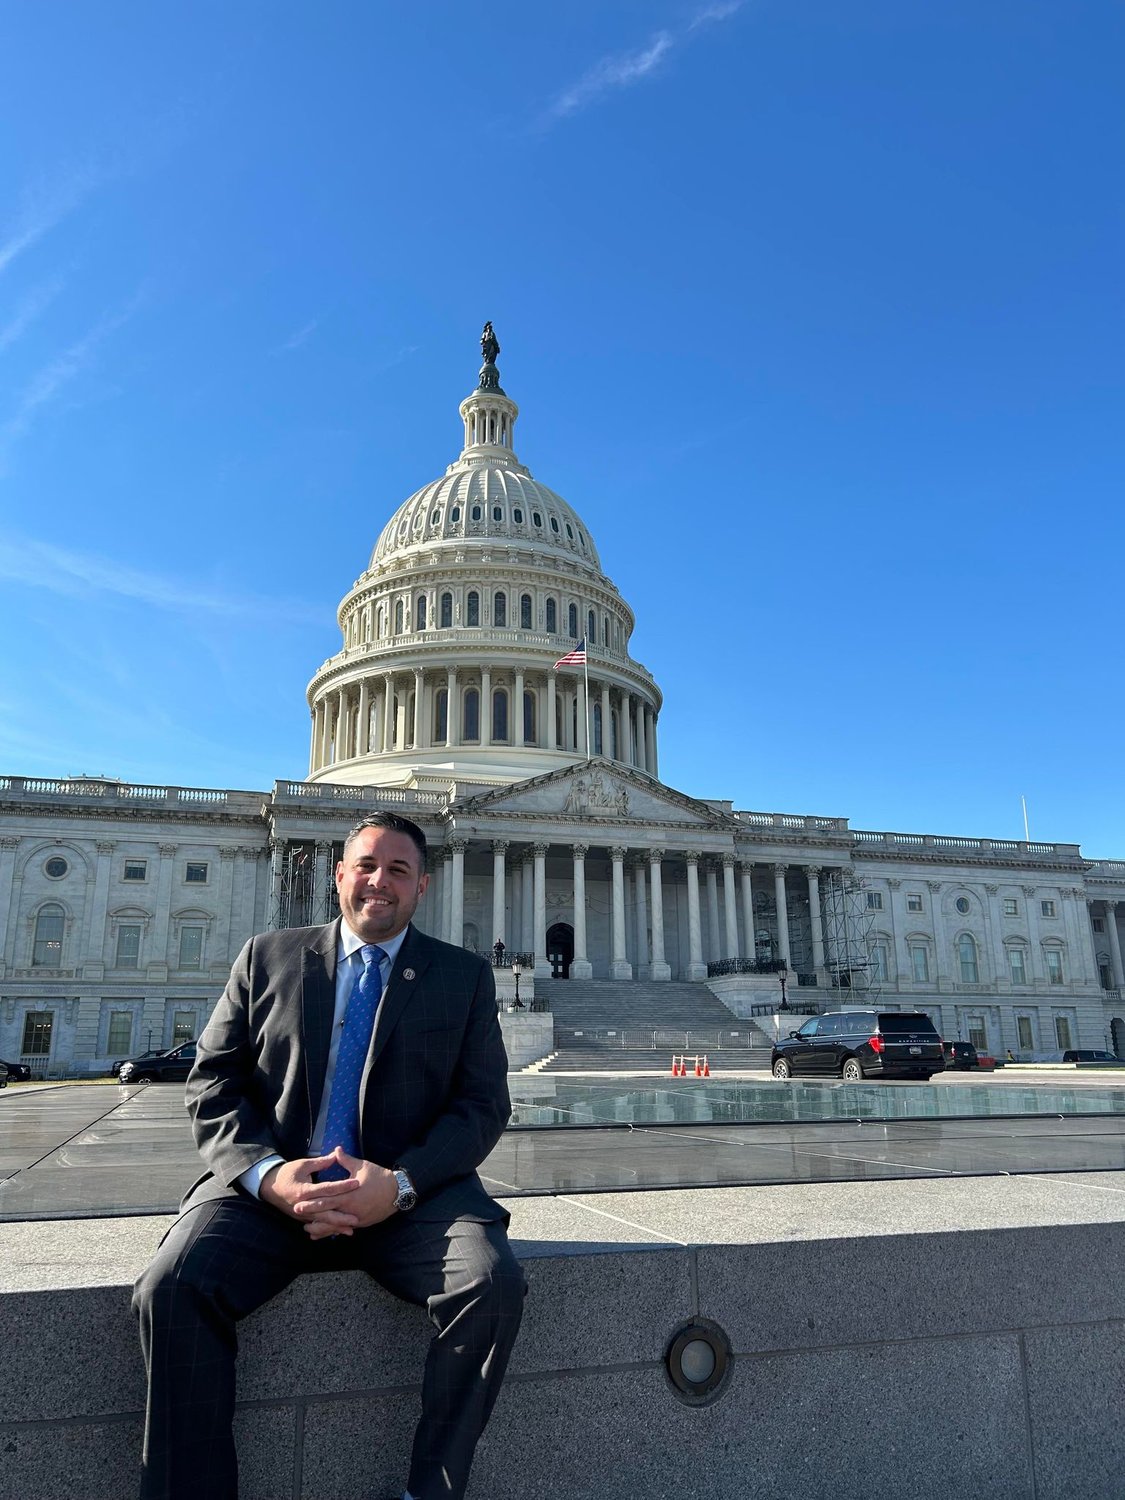 By the steps of the U.S. Capitol Building sits freshly elected Anthony D’Esposito, a Republican from Island Park, getting ready for his first day in Congress.